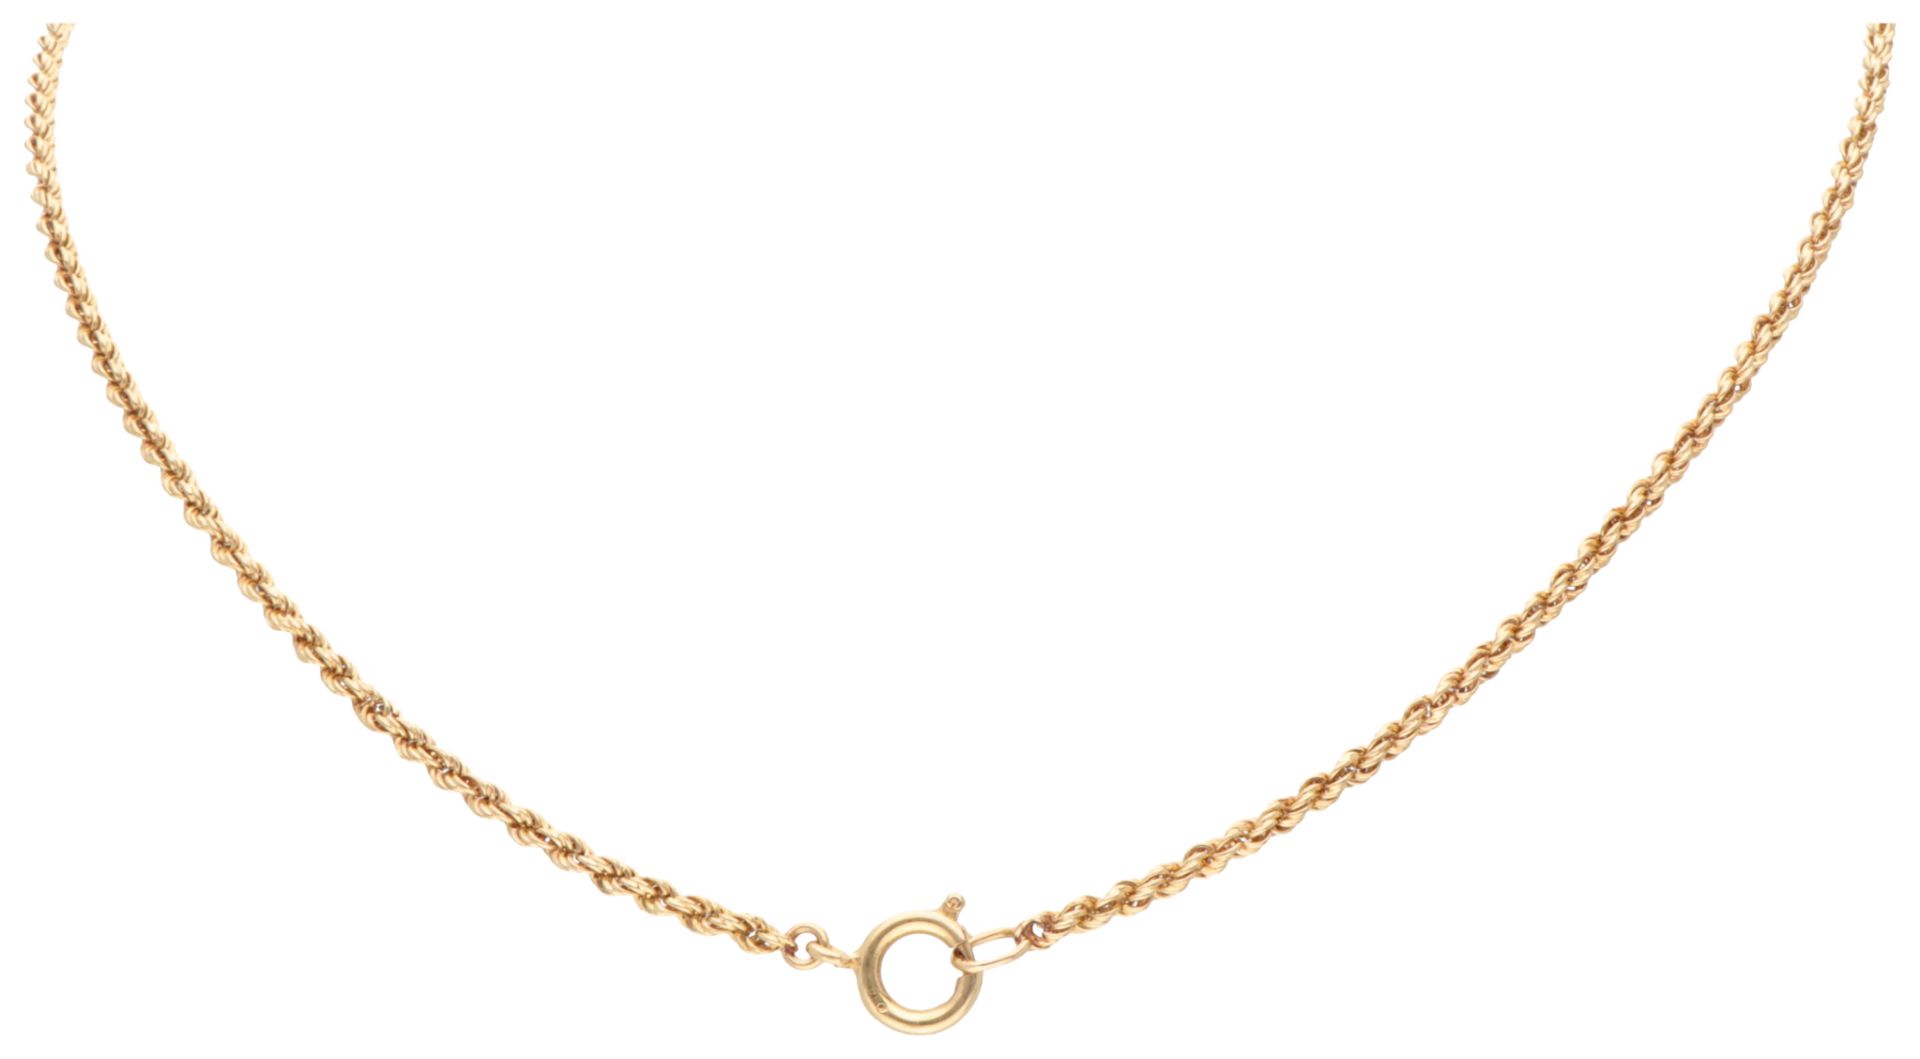 14K Yellow gold rope link necklace. - Image 2 of 2